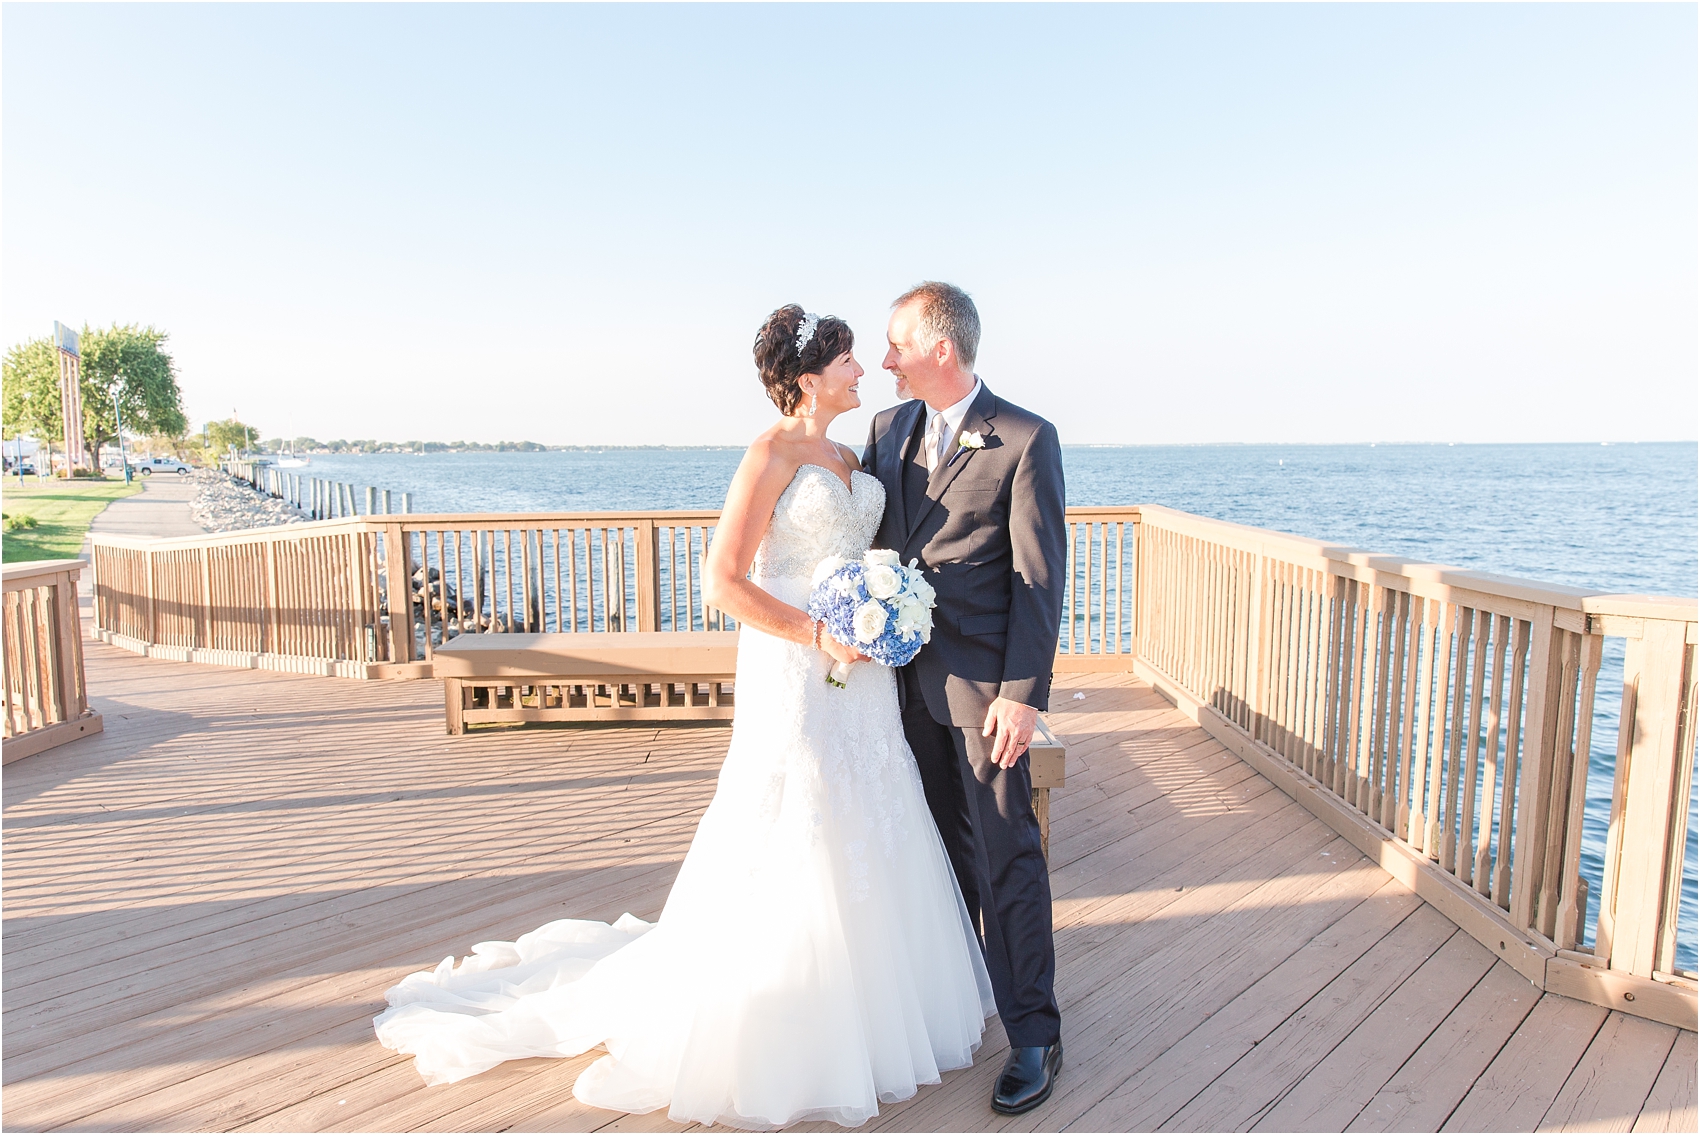 classic-natuical-inspired-wedding-photos-on-infinity-ovation-yacht-in-st-clair-shores-mi-by-courtney-carolyn-photography_0062.jpg